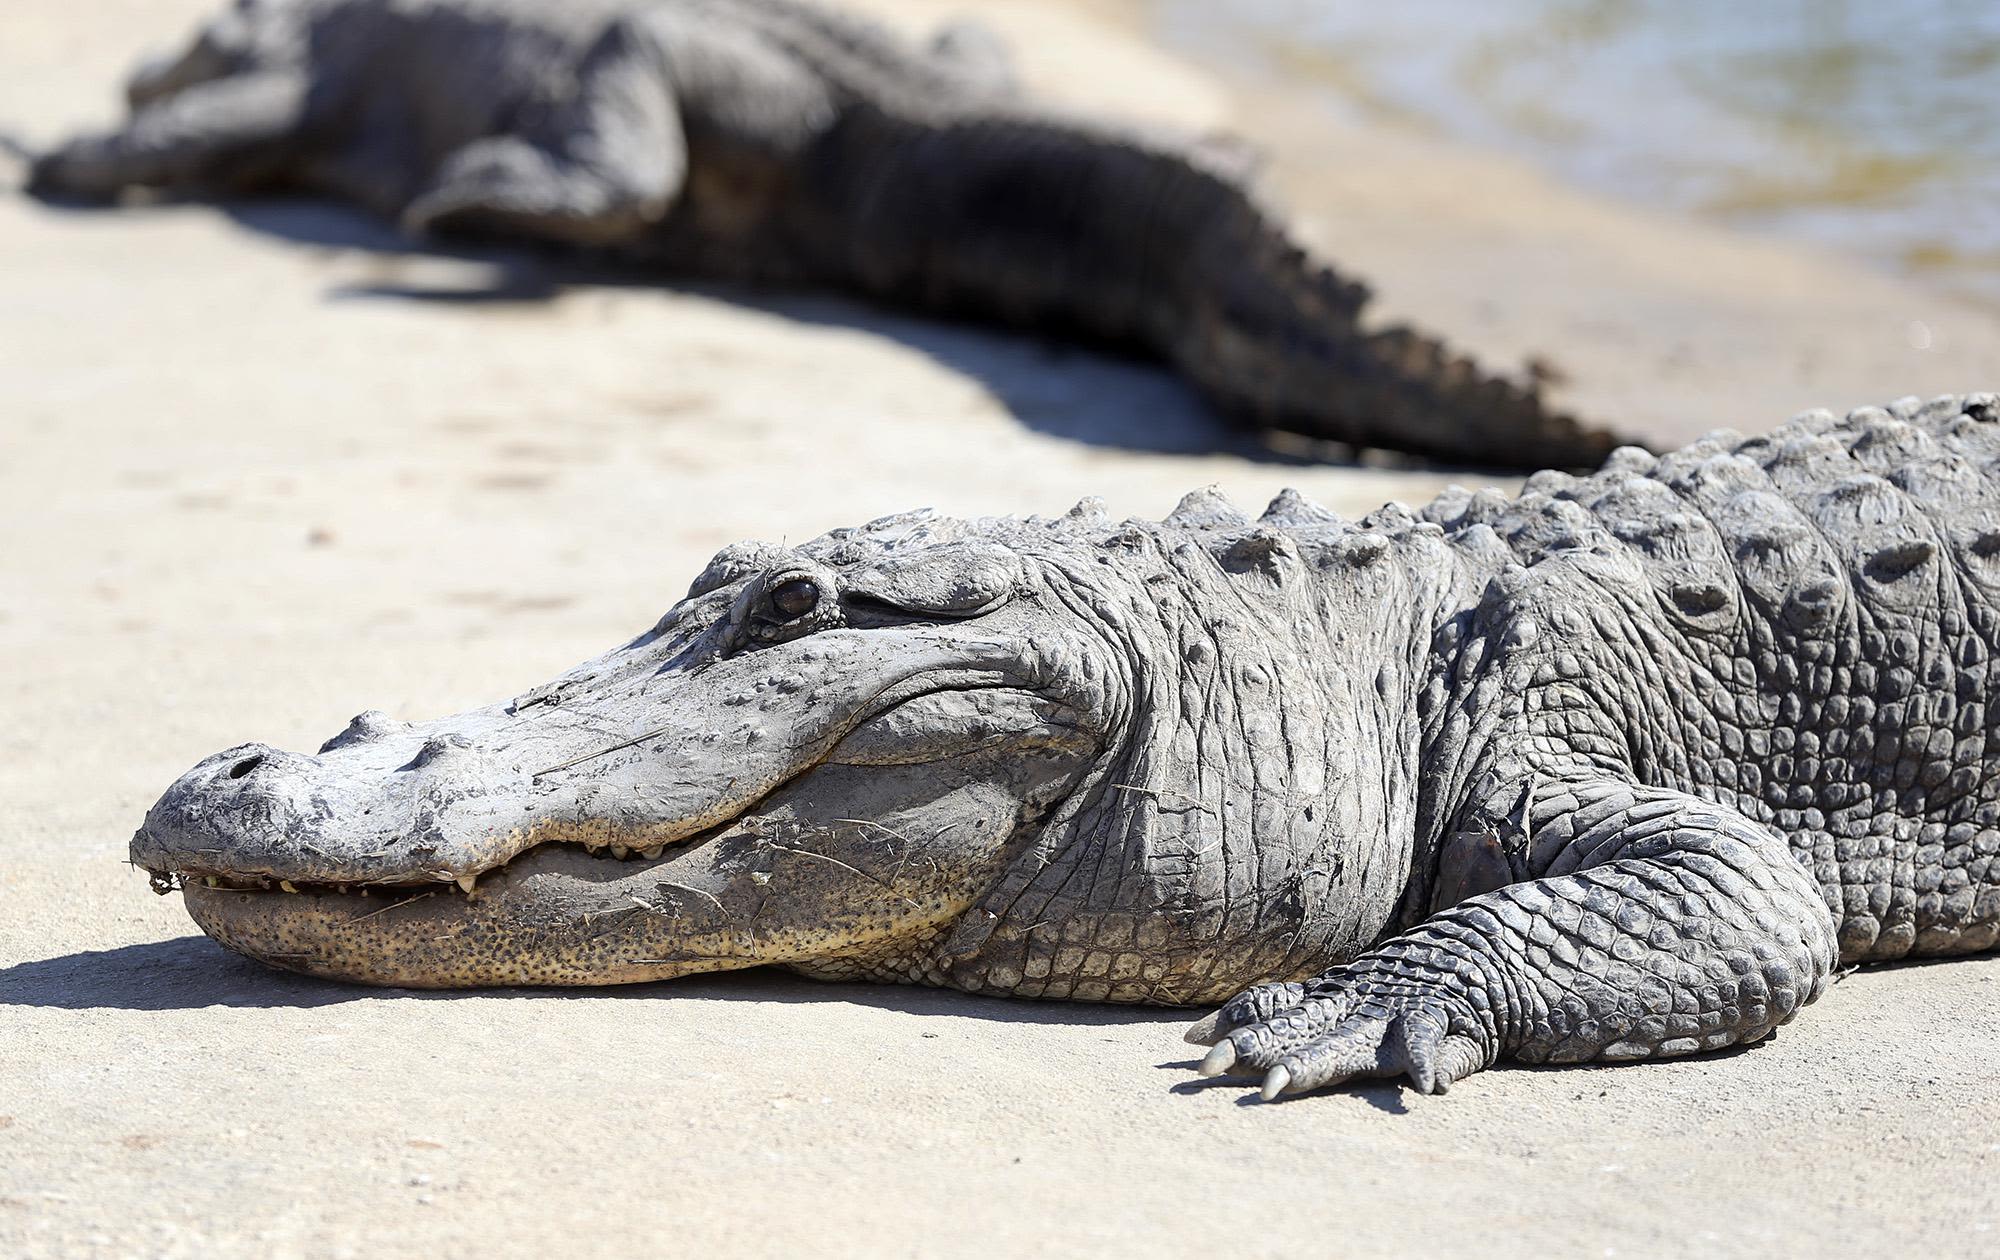 Alligator spotted in Rio Grande has officials urging caution